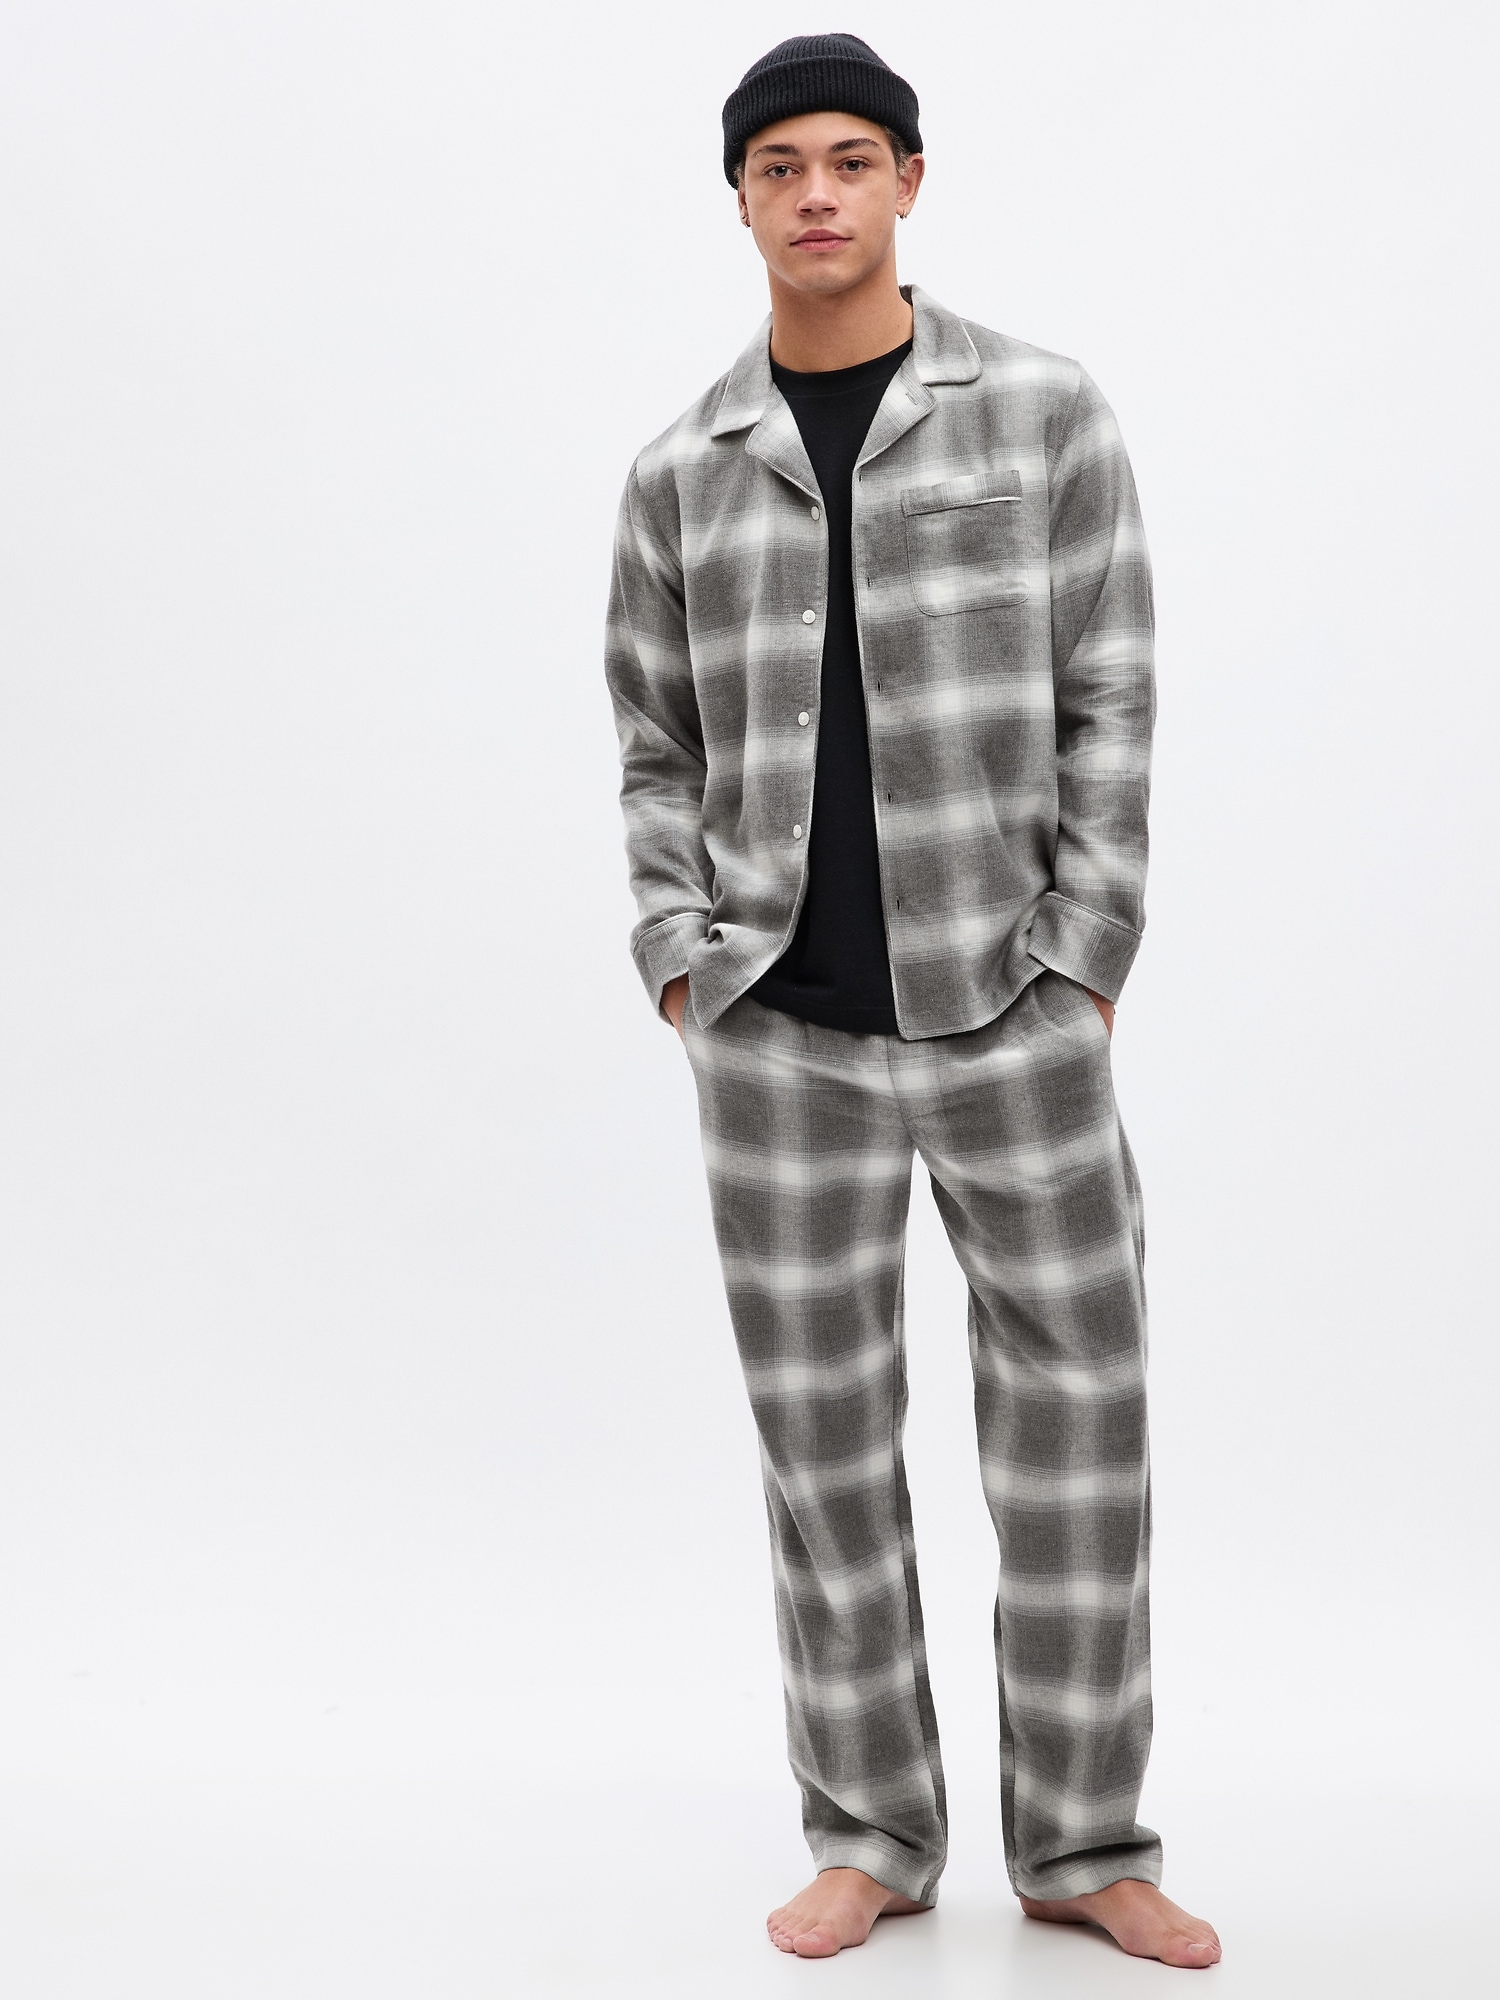 Buy Gap Flannel Check Family Christmas Pyjama Bottoms from the Gap